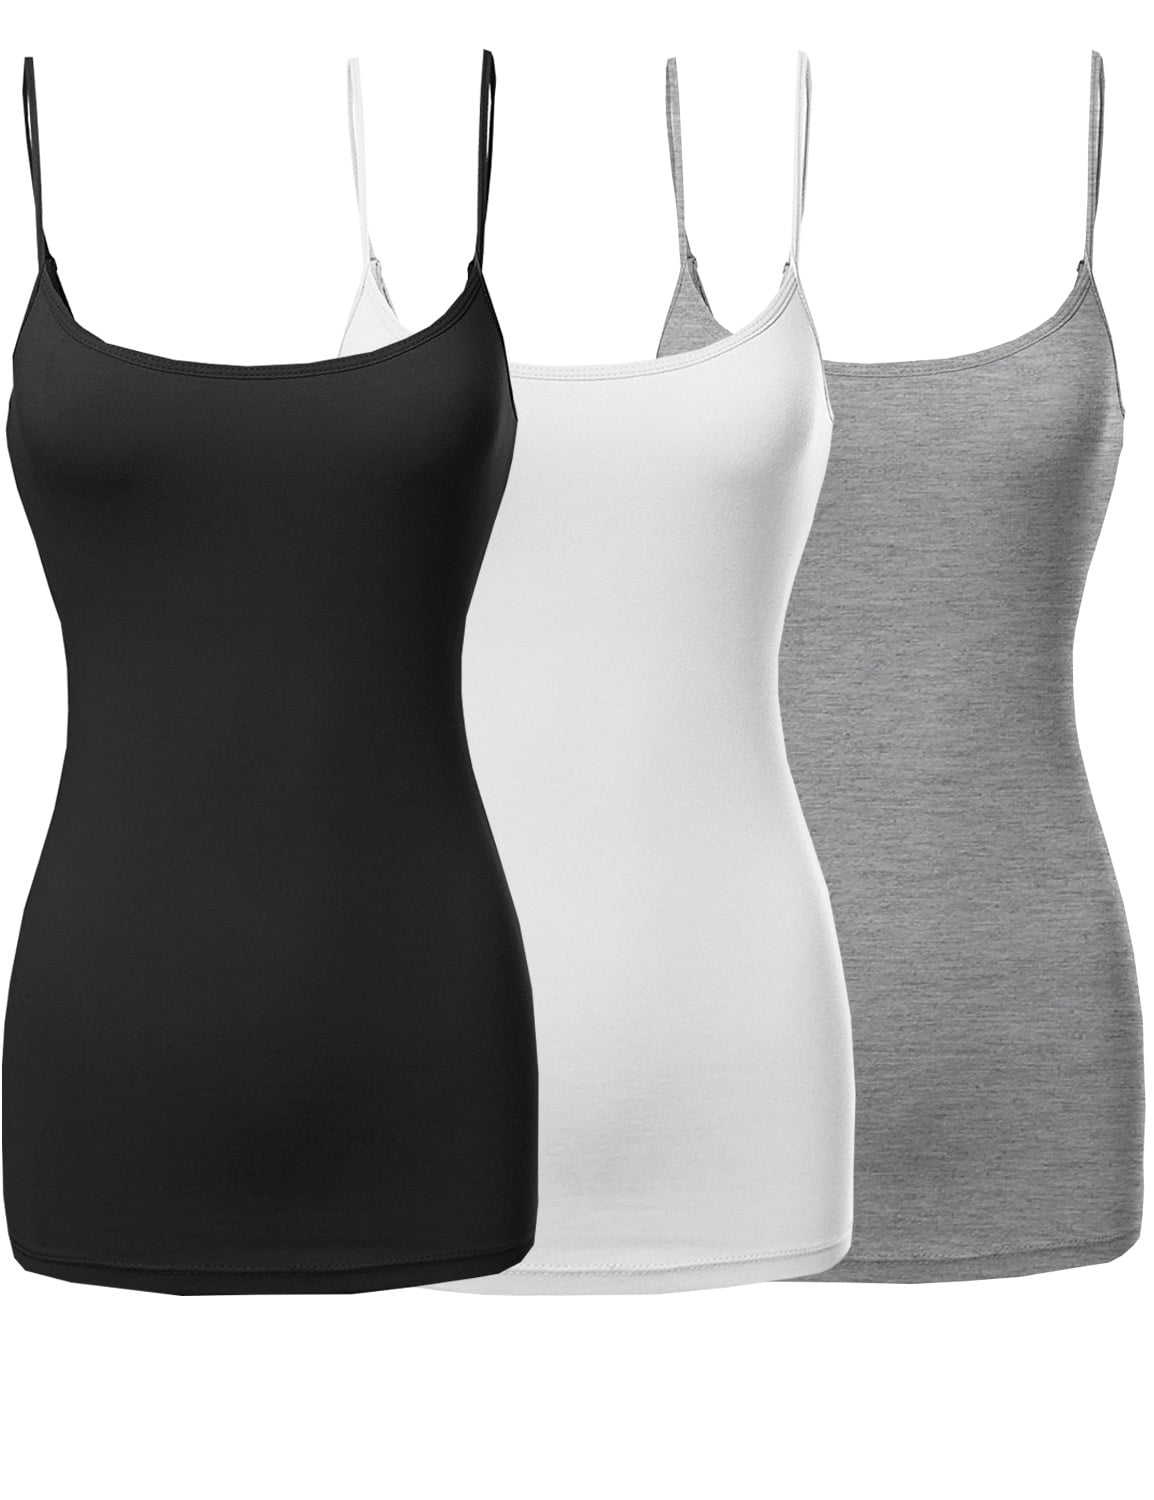 3 Packs - TheLovely Womens & Plus Sizes Basic Solid Long Length ...